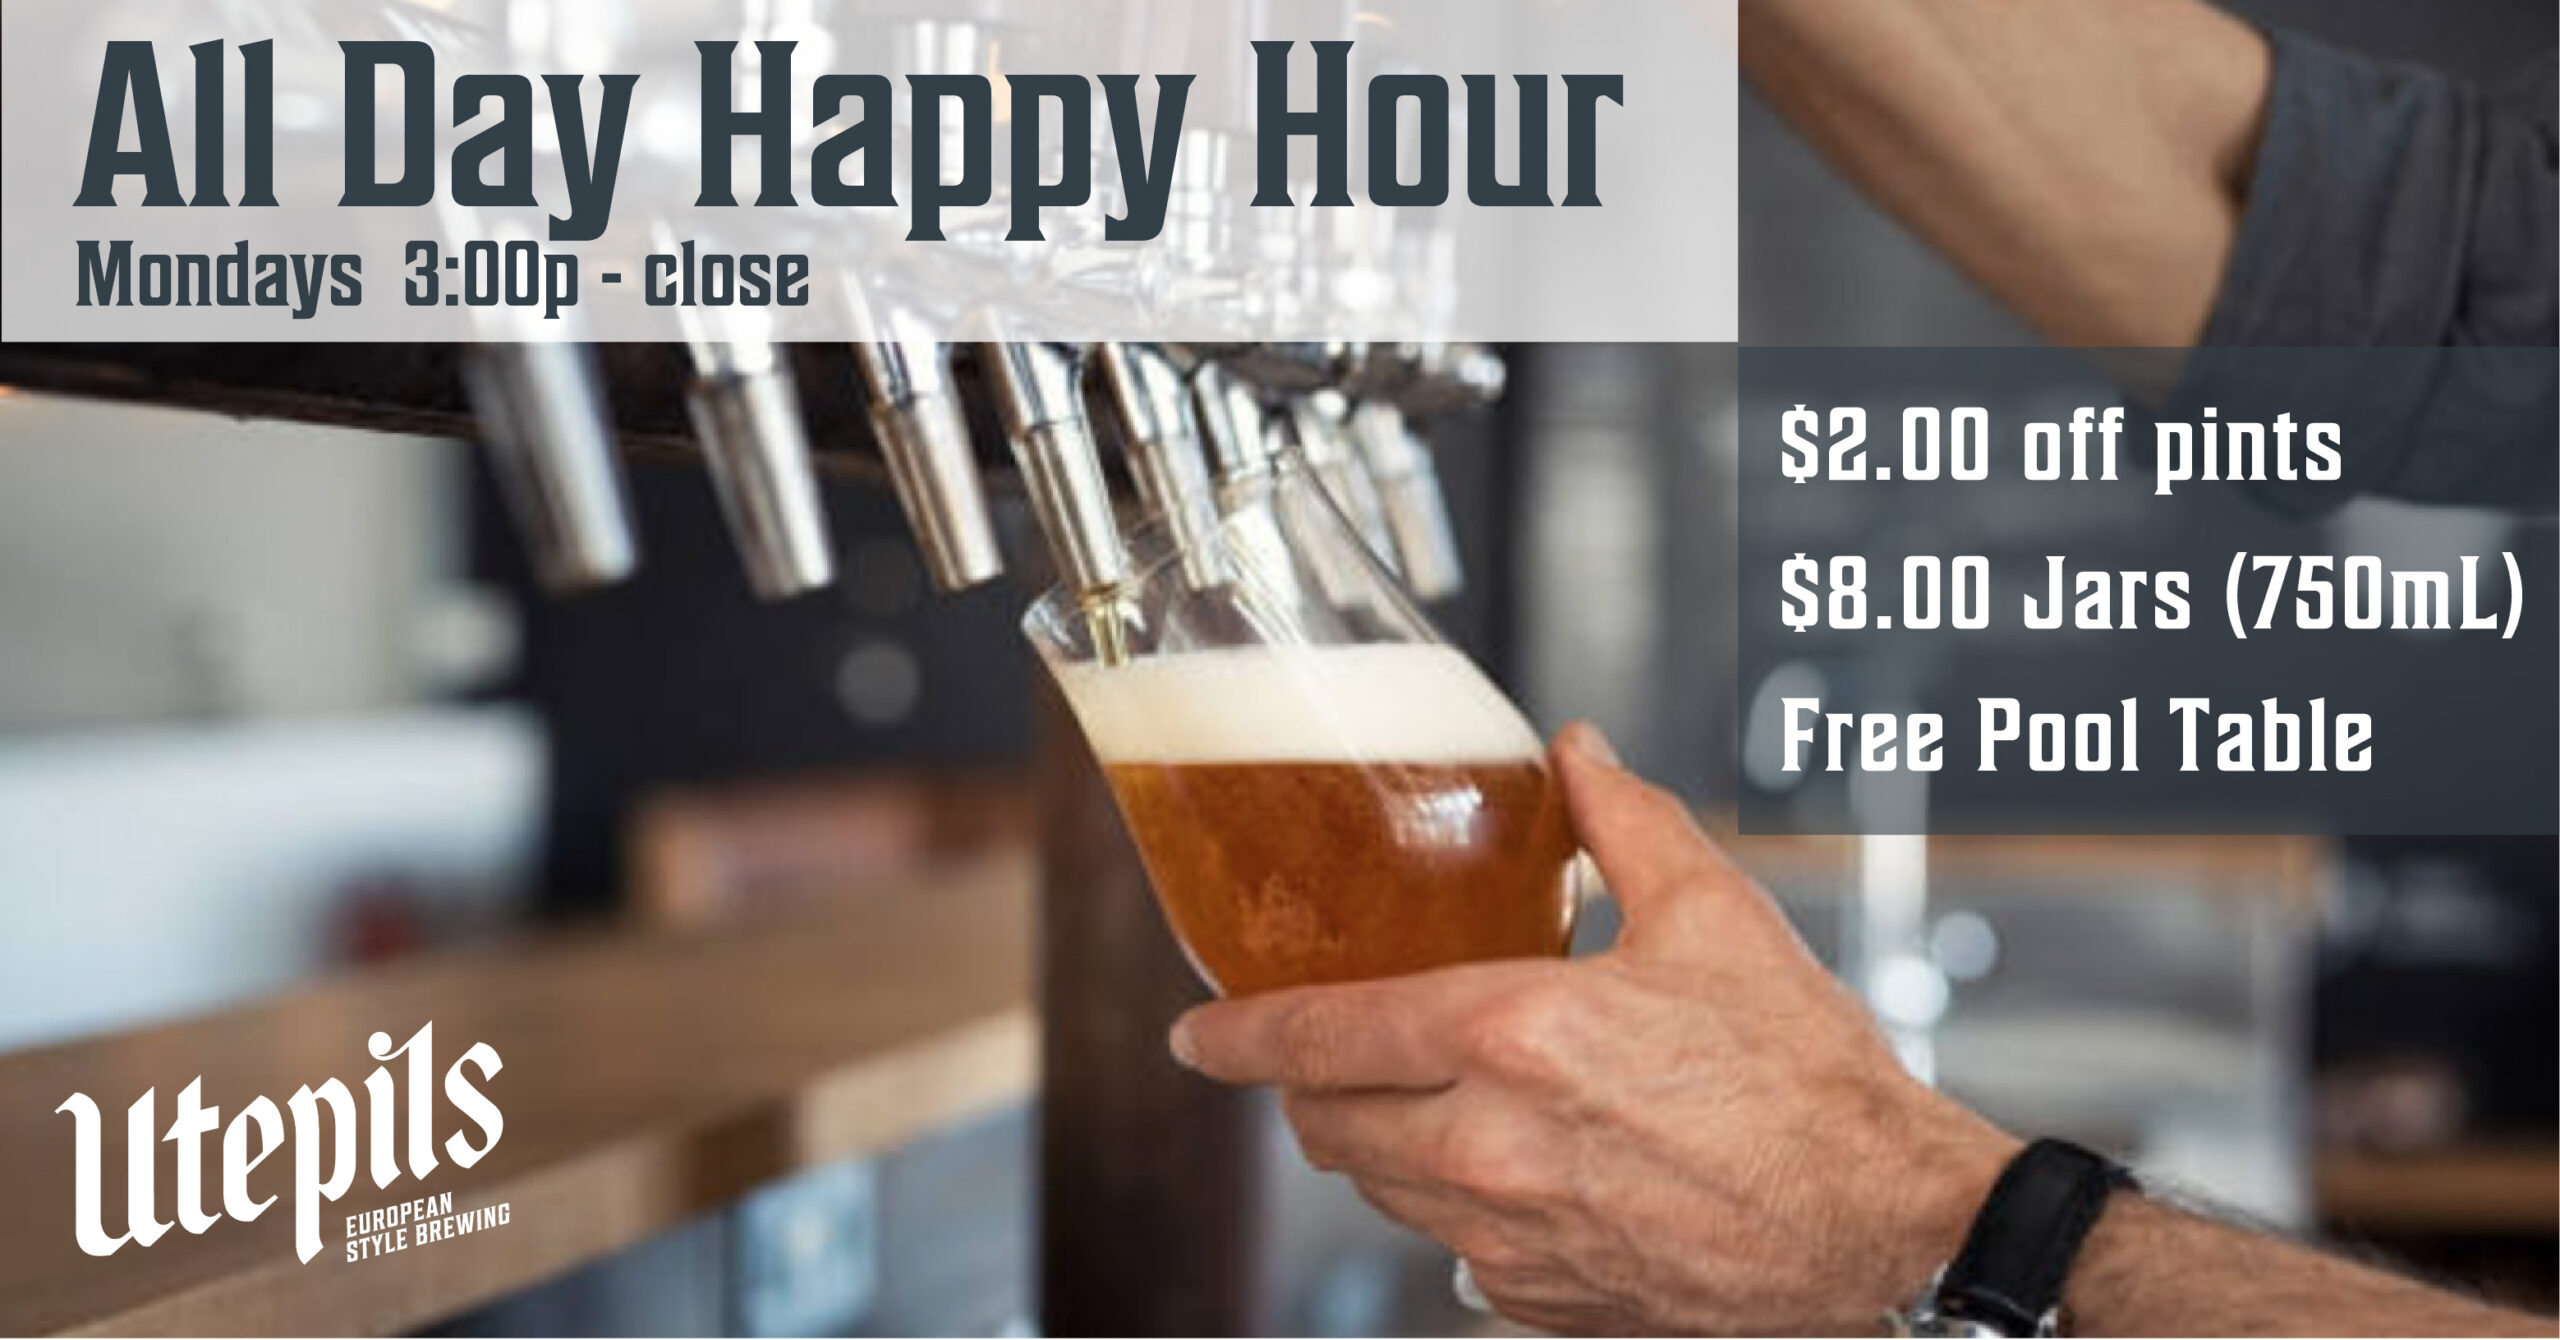 All Day Happy Hour | Utepils Brewing